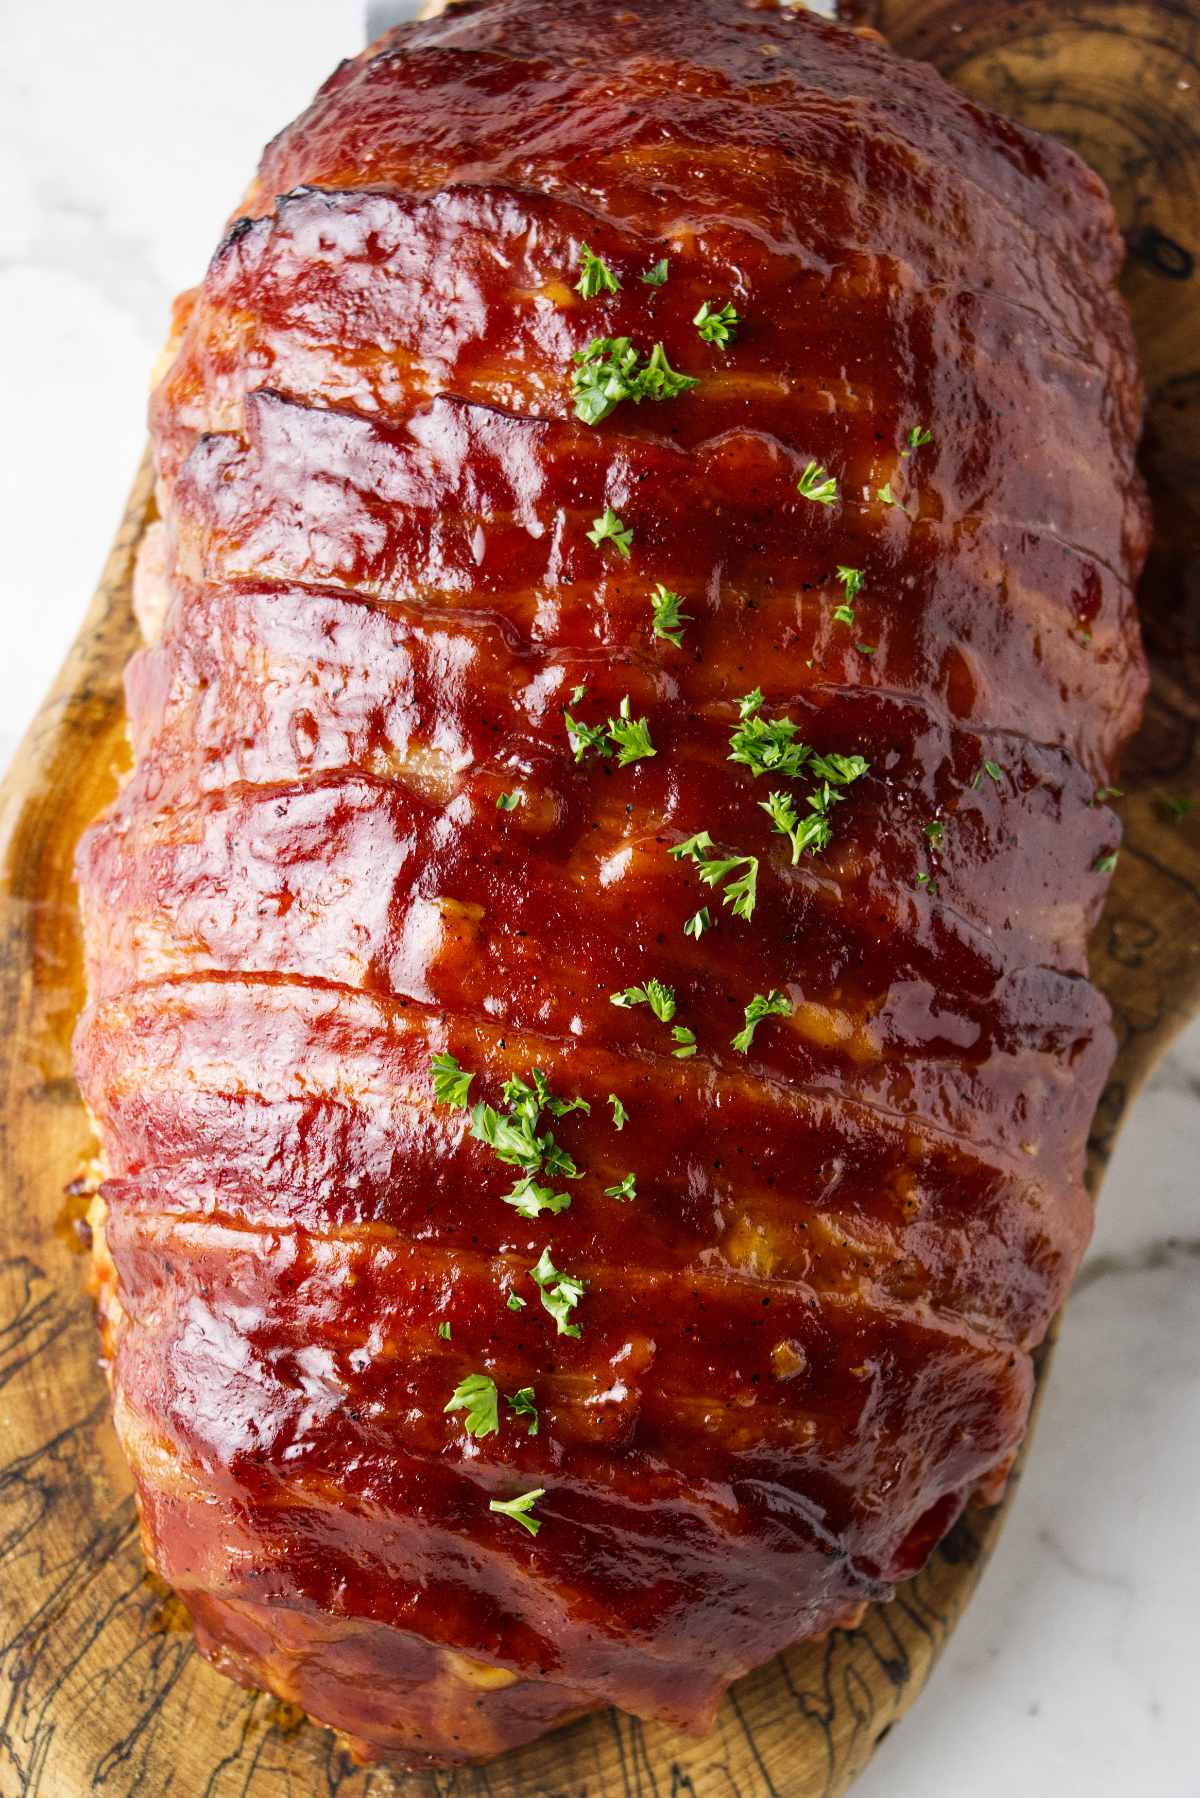 Traeger smoked bacon wrapped meatloaf on a cutting board